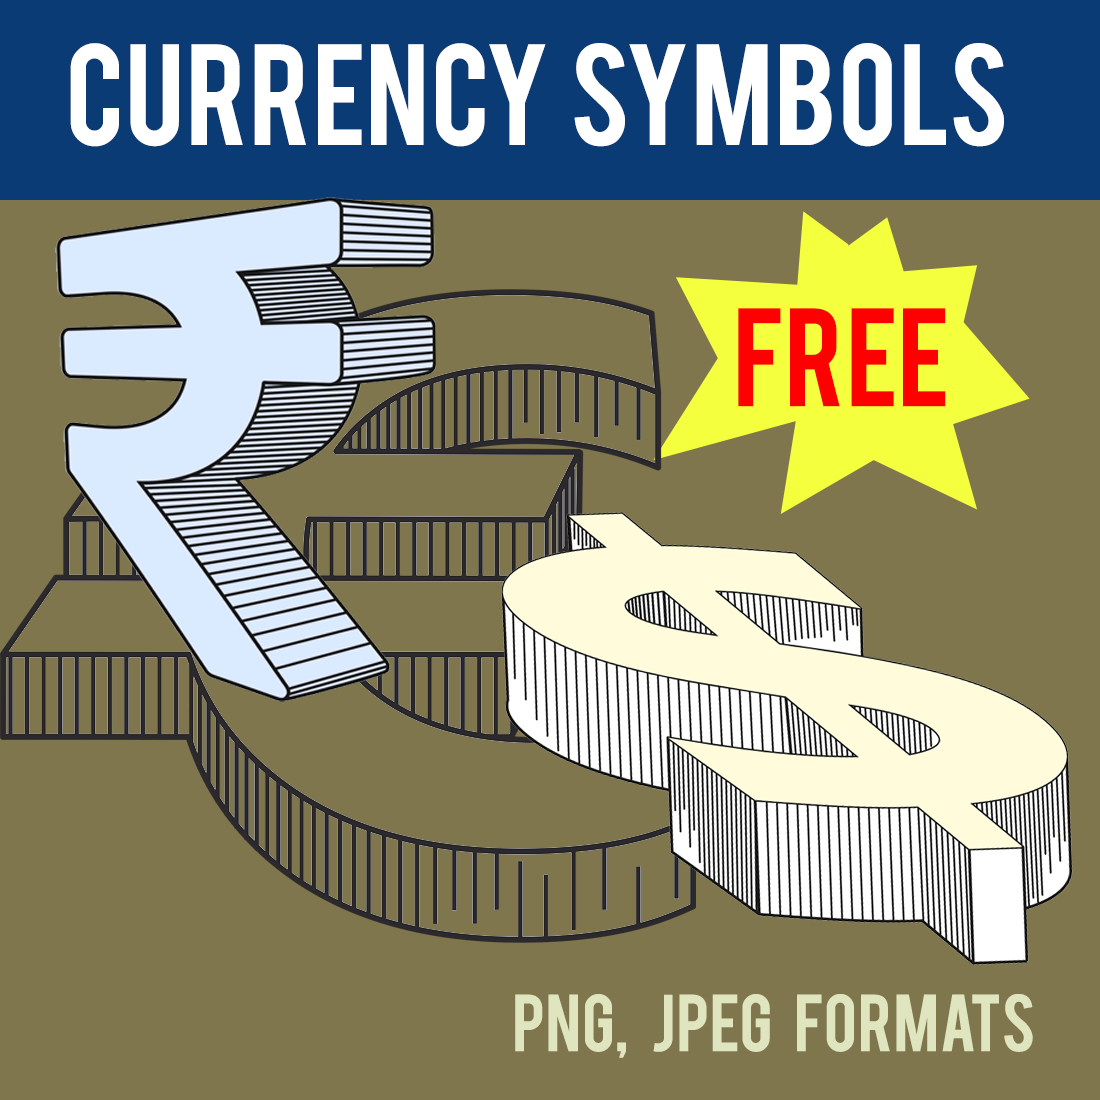 Currency symbols preview image.